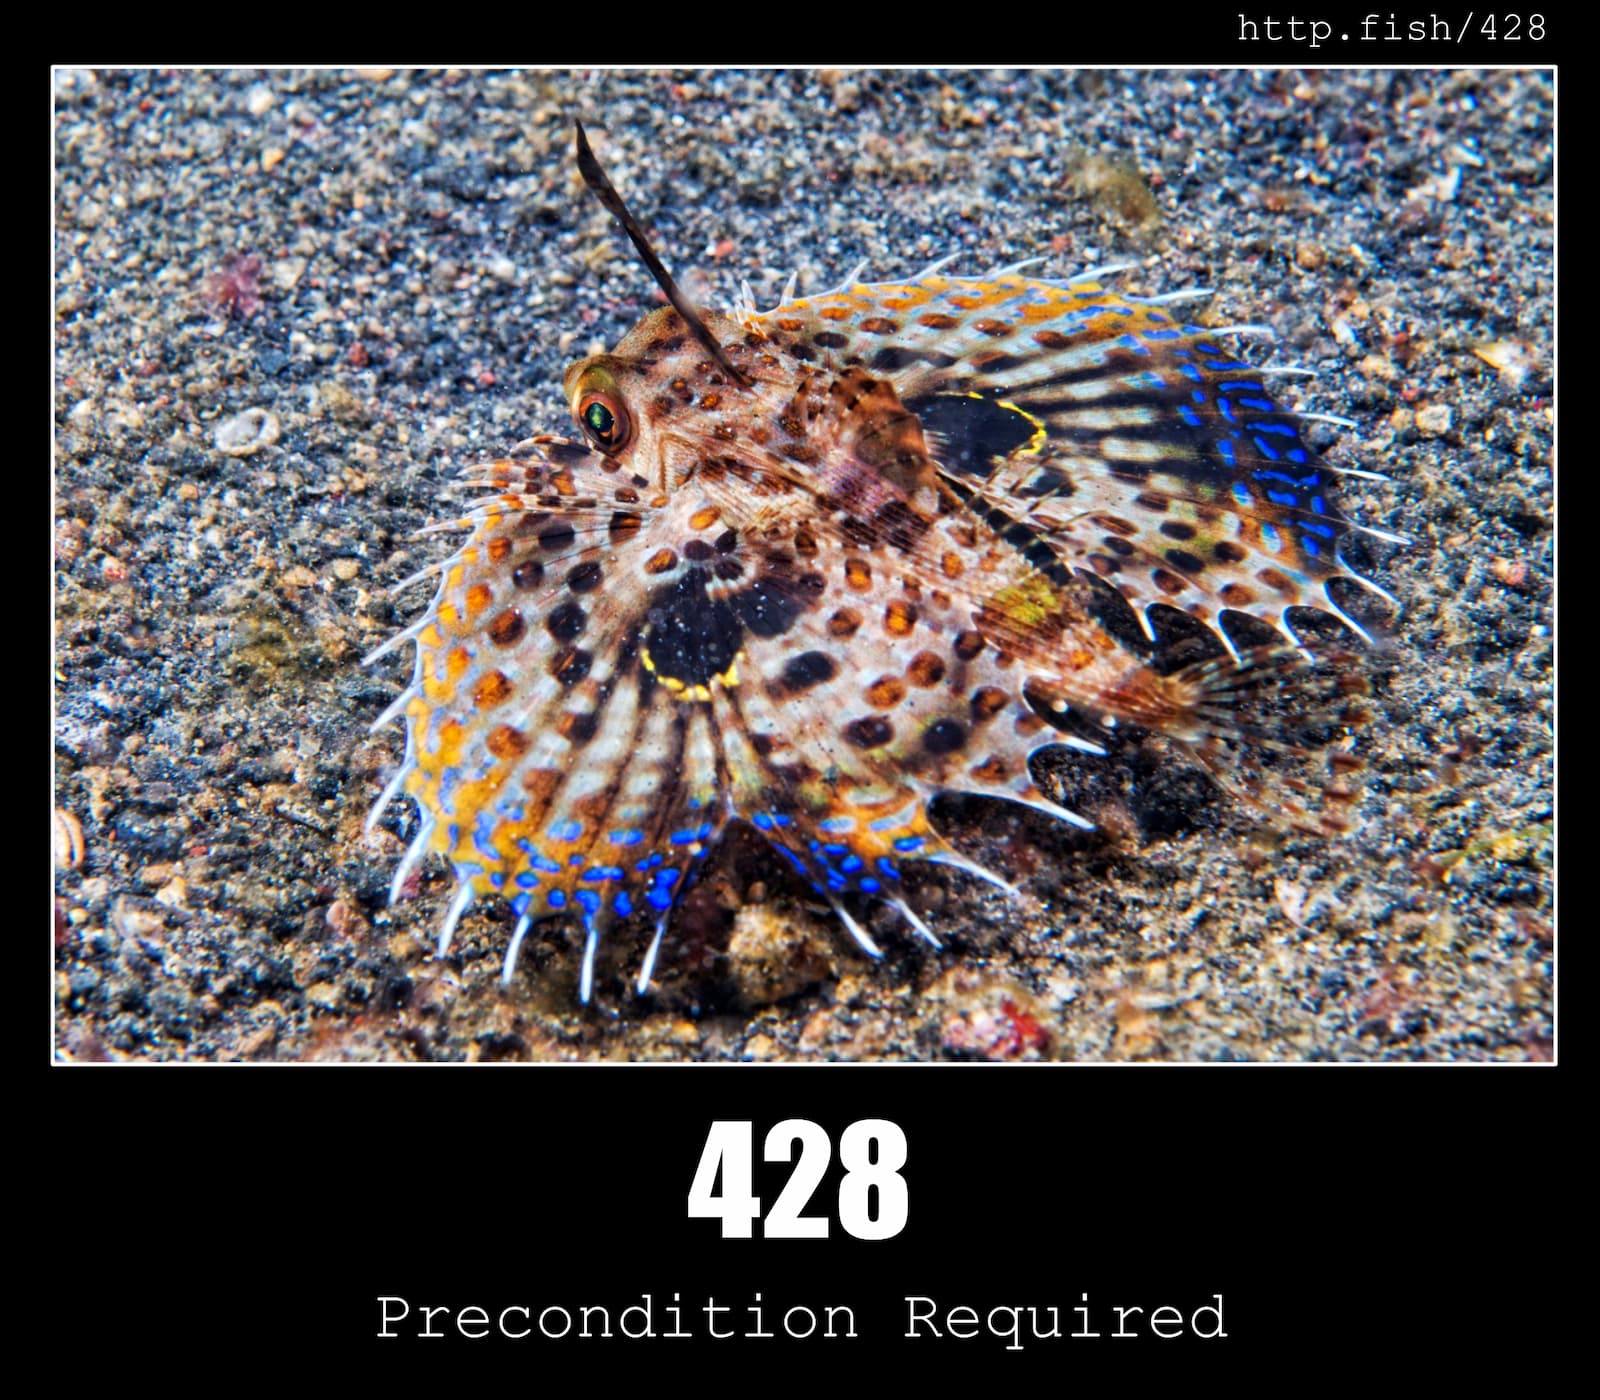 HTTP Status Code 428 Precondition Required & Fish